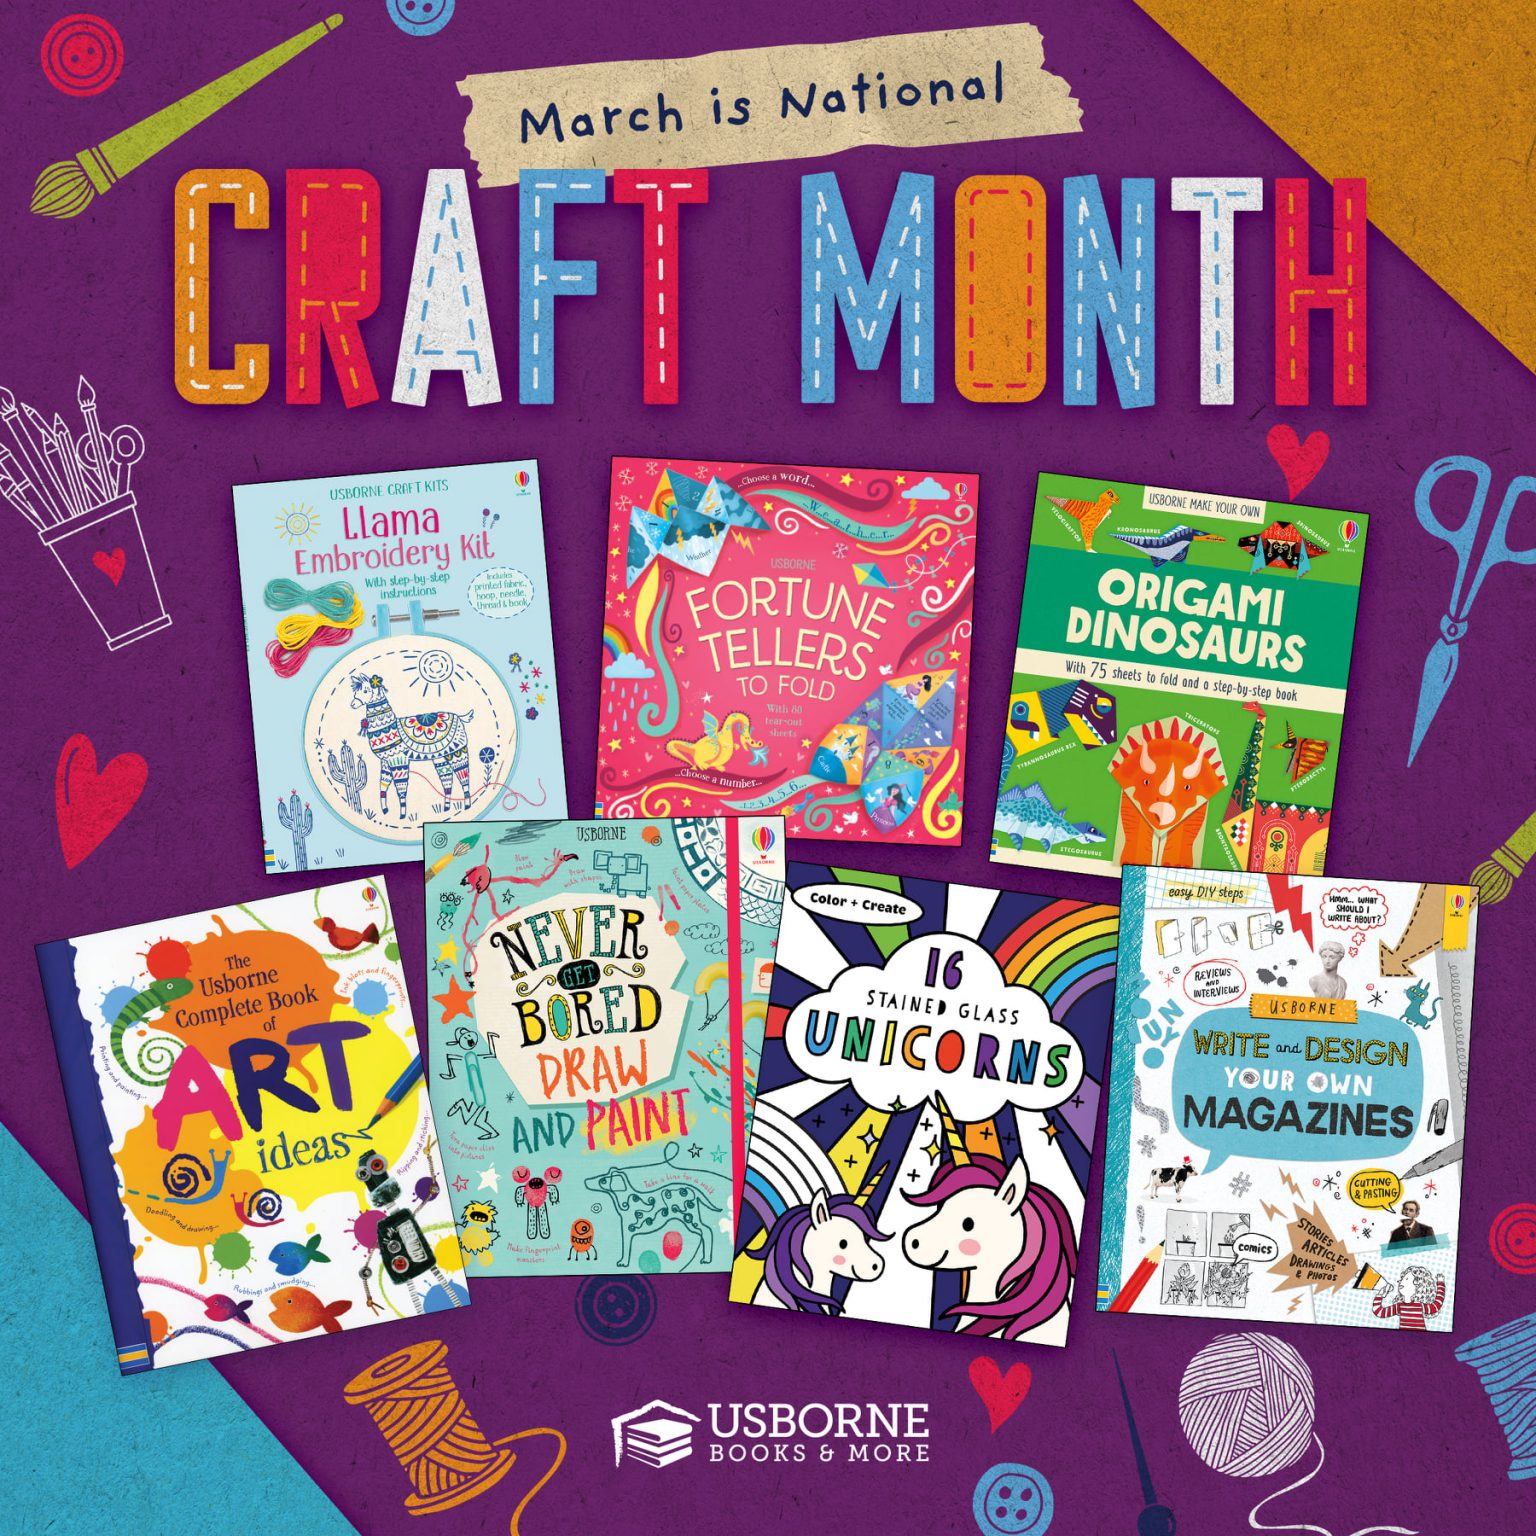 March National Craft Month Barnyard Books Brand Partner of PaperPie